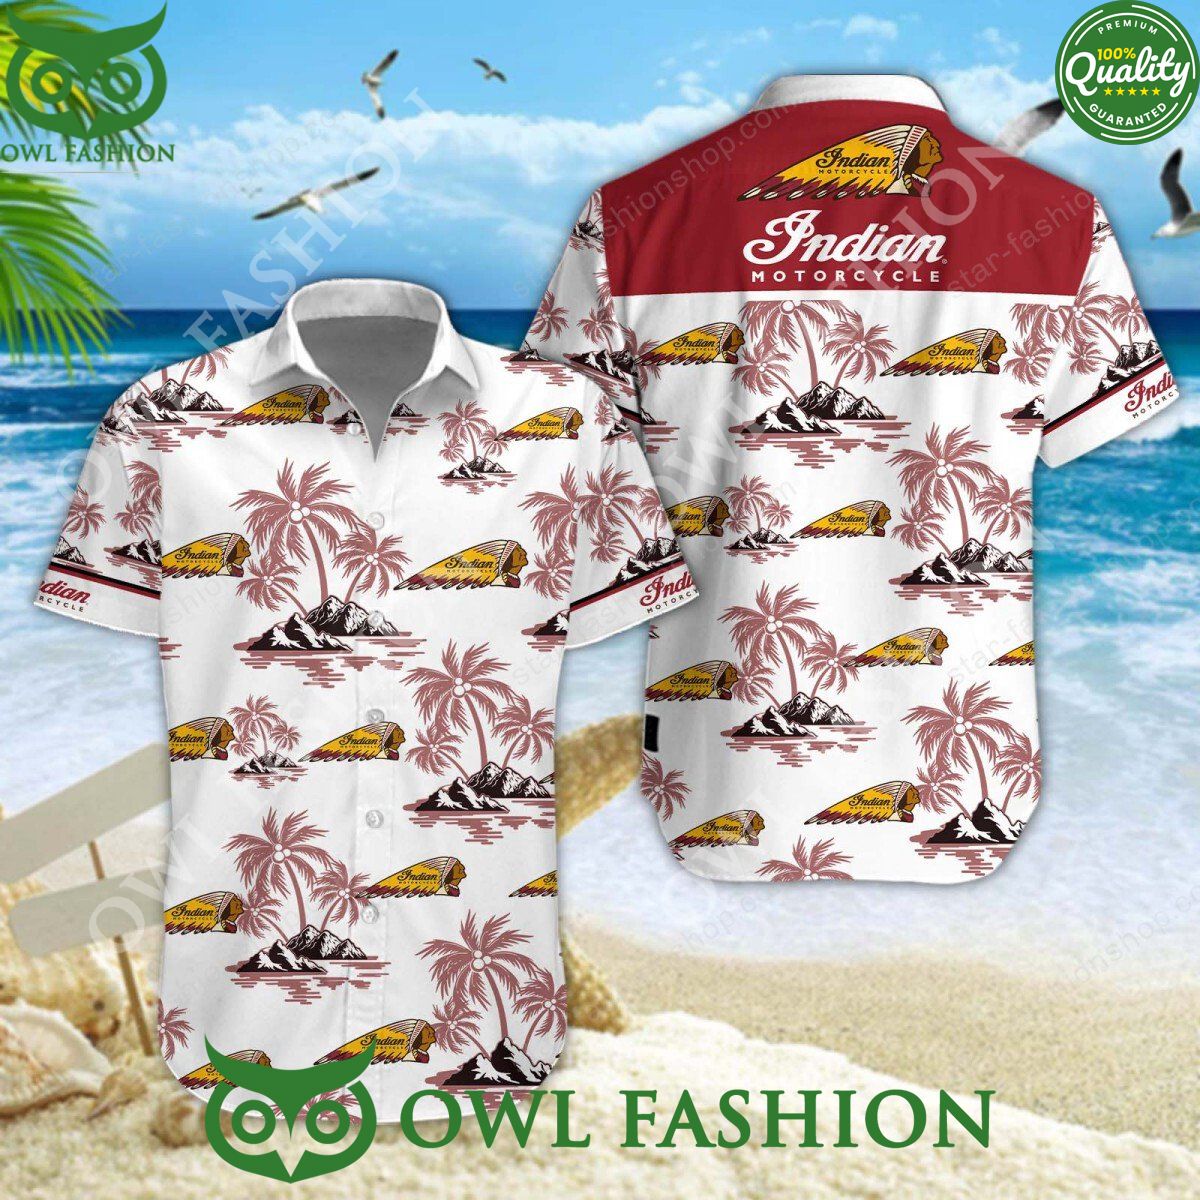 indian motorcycle classic automobile brand limited hawaiian shirt and short 1 LmTlr.jpg